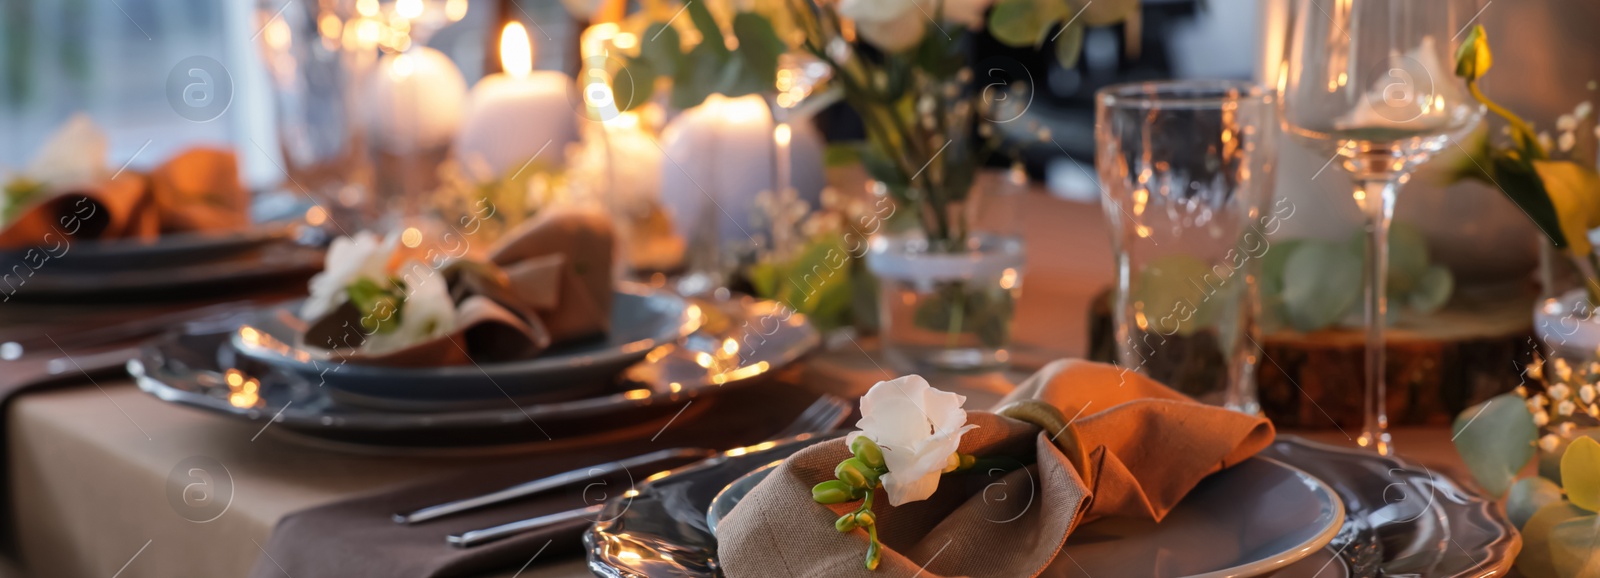 Image of Elegant table setting with beautiful floral decor. Banner design